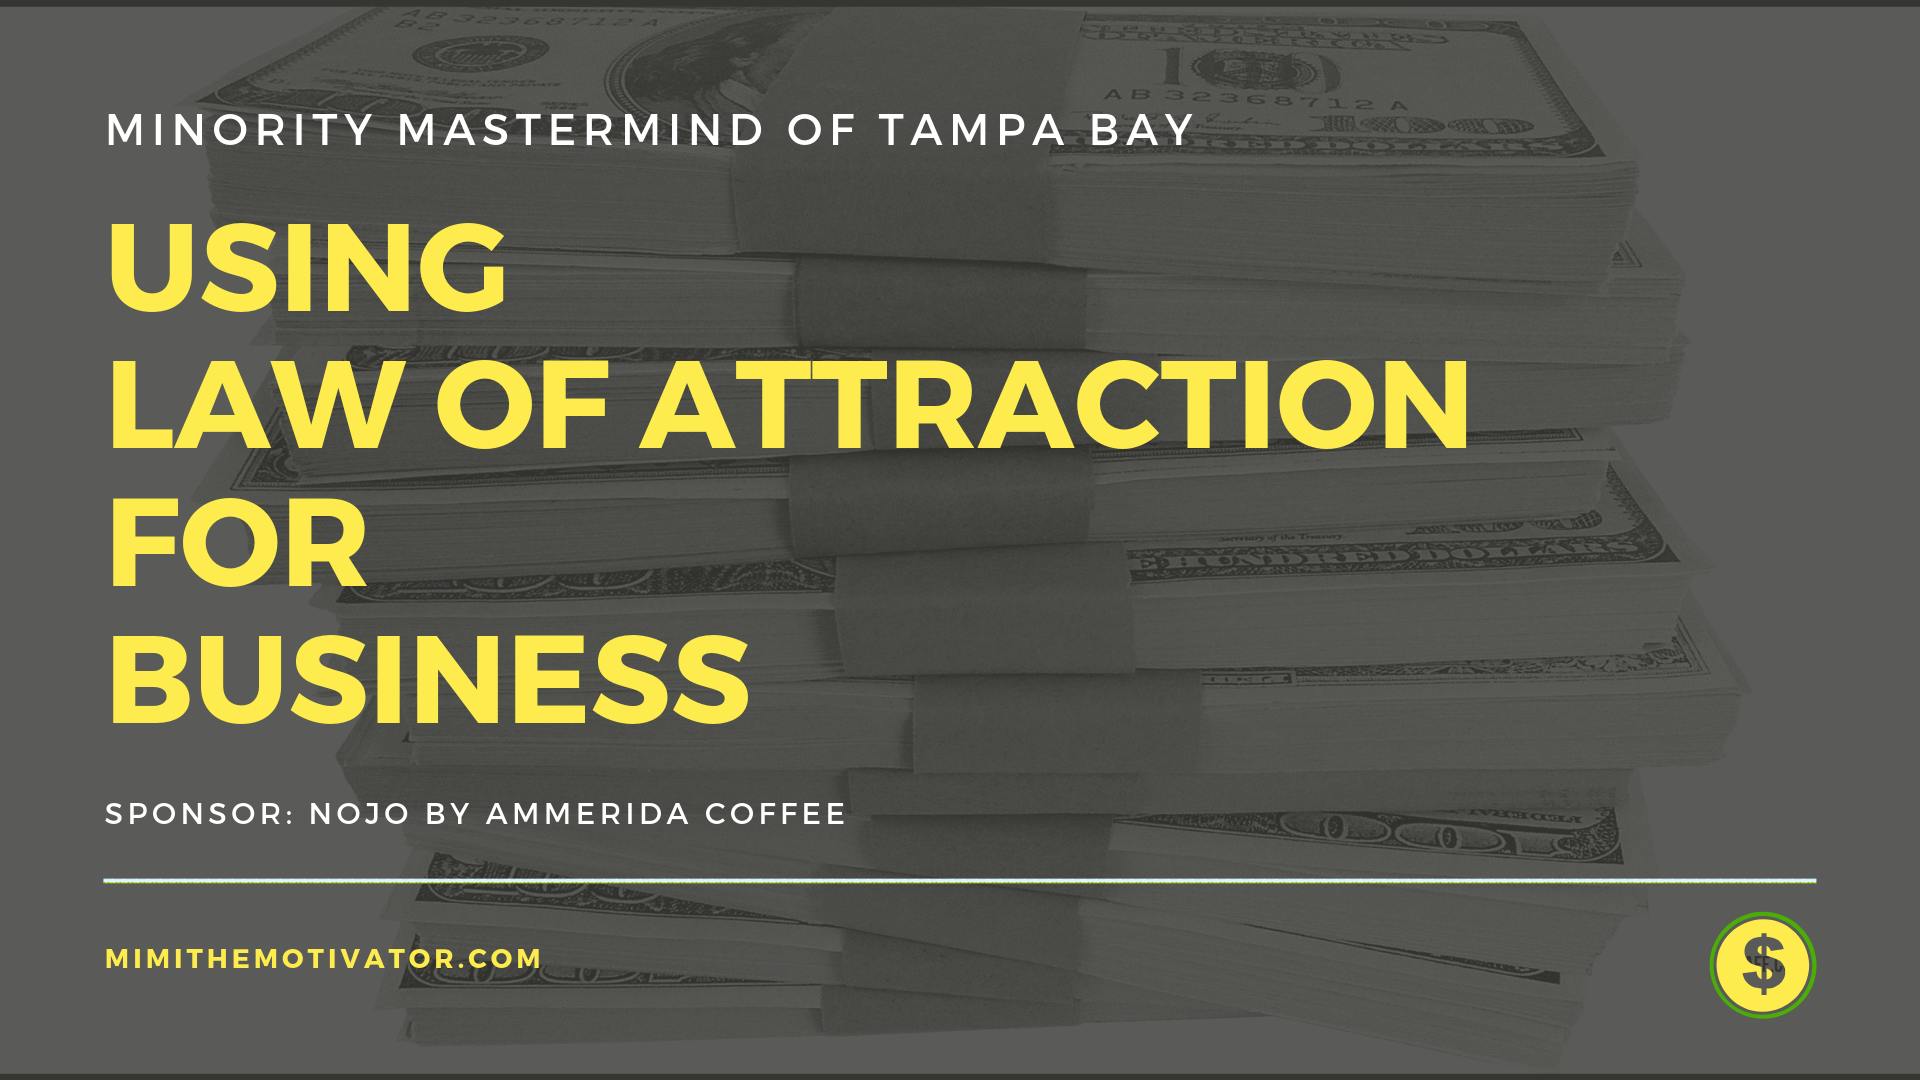 How To Use Law of Attraction for Business